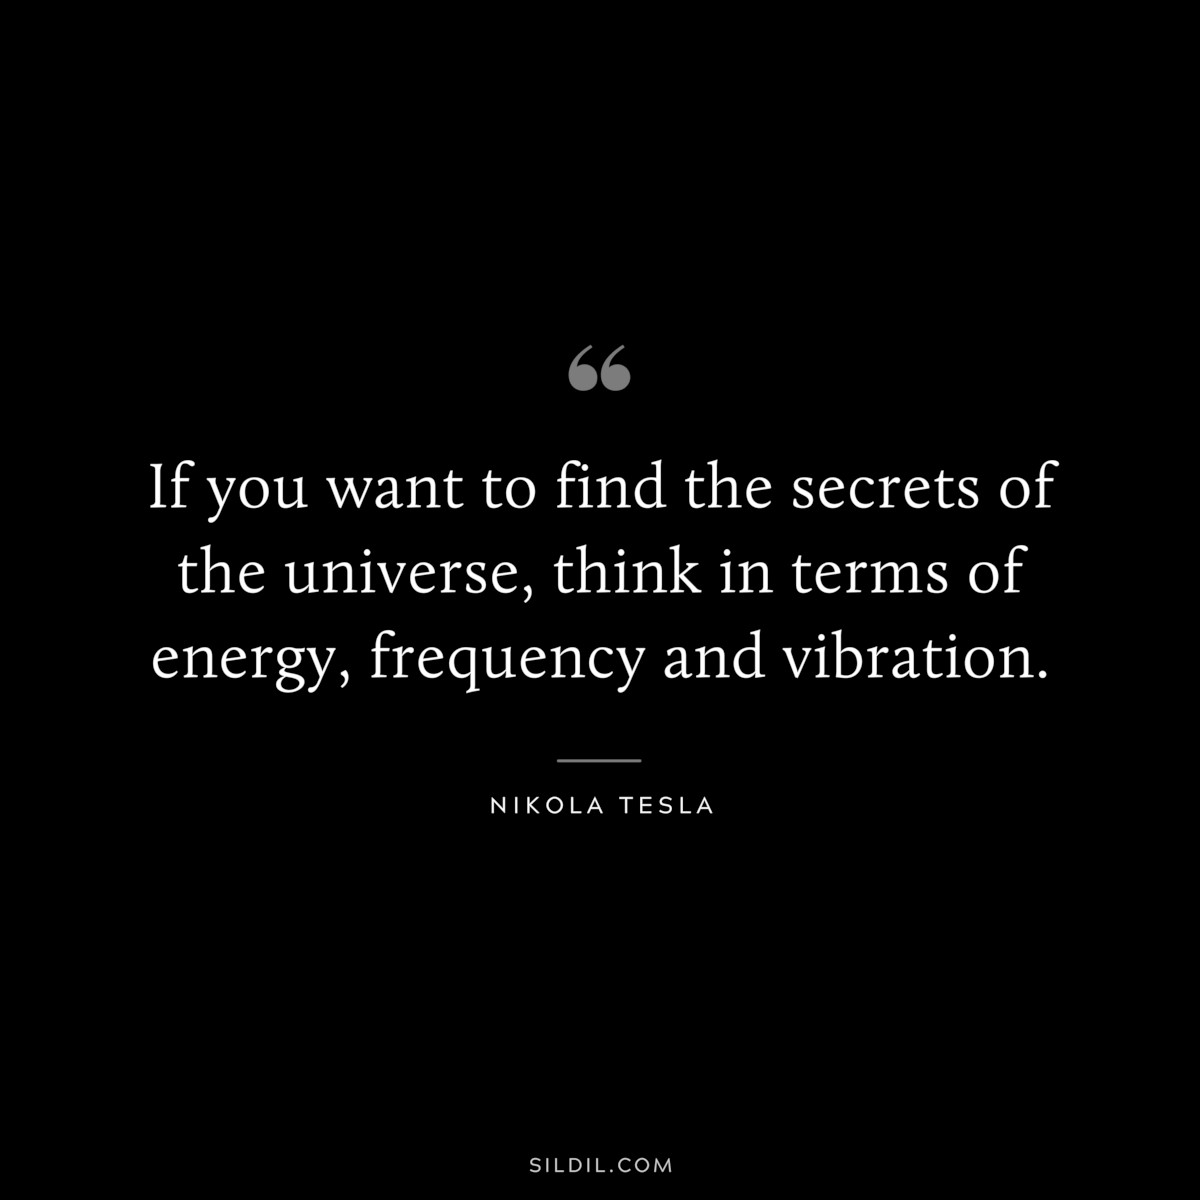 If you want to find the secrets of the universe, think in terms of energy, frequency and vibration. ― Nikola Tesla